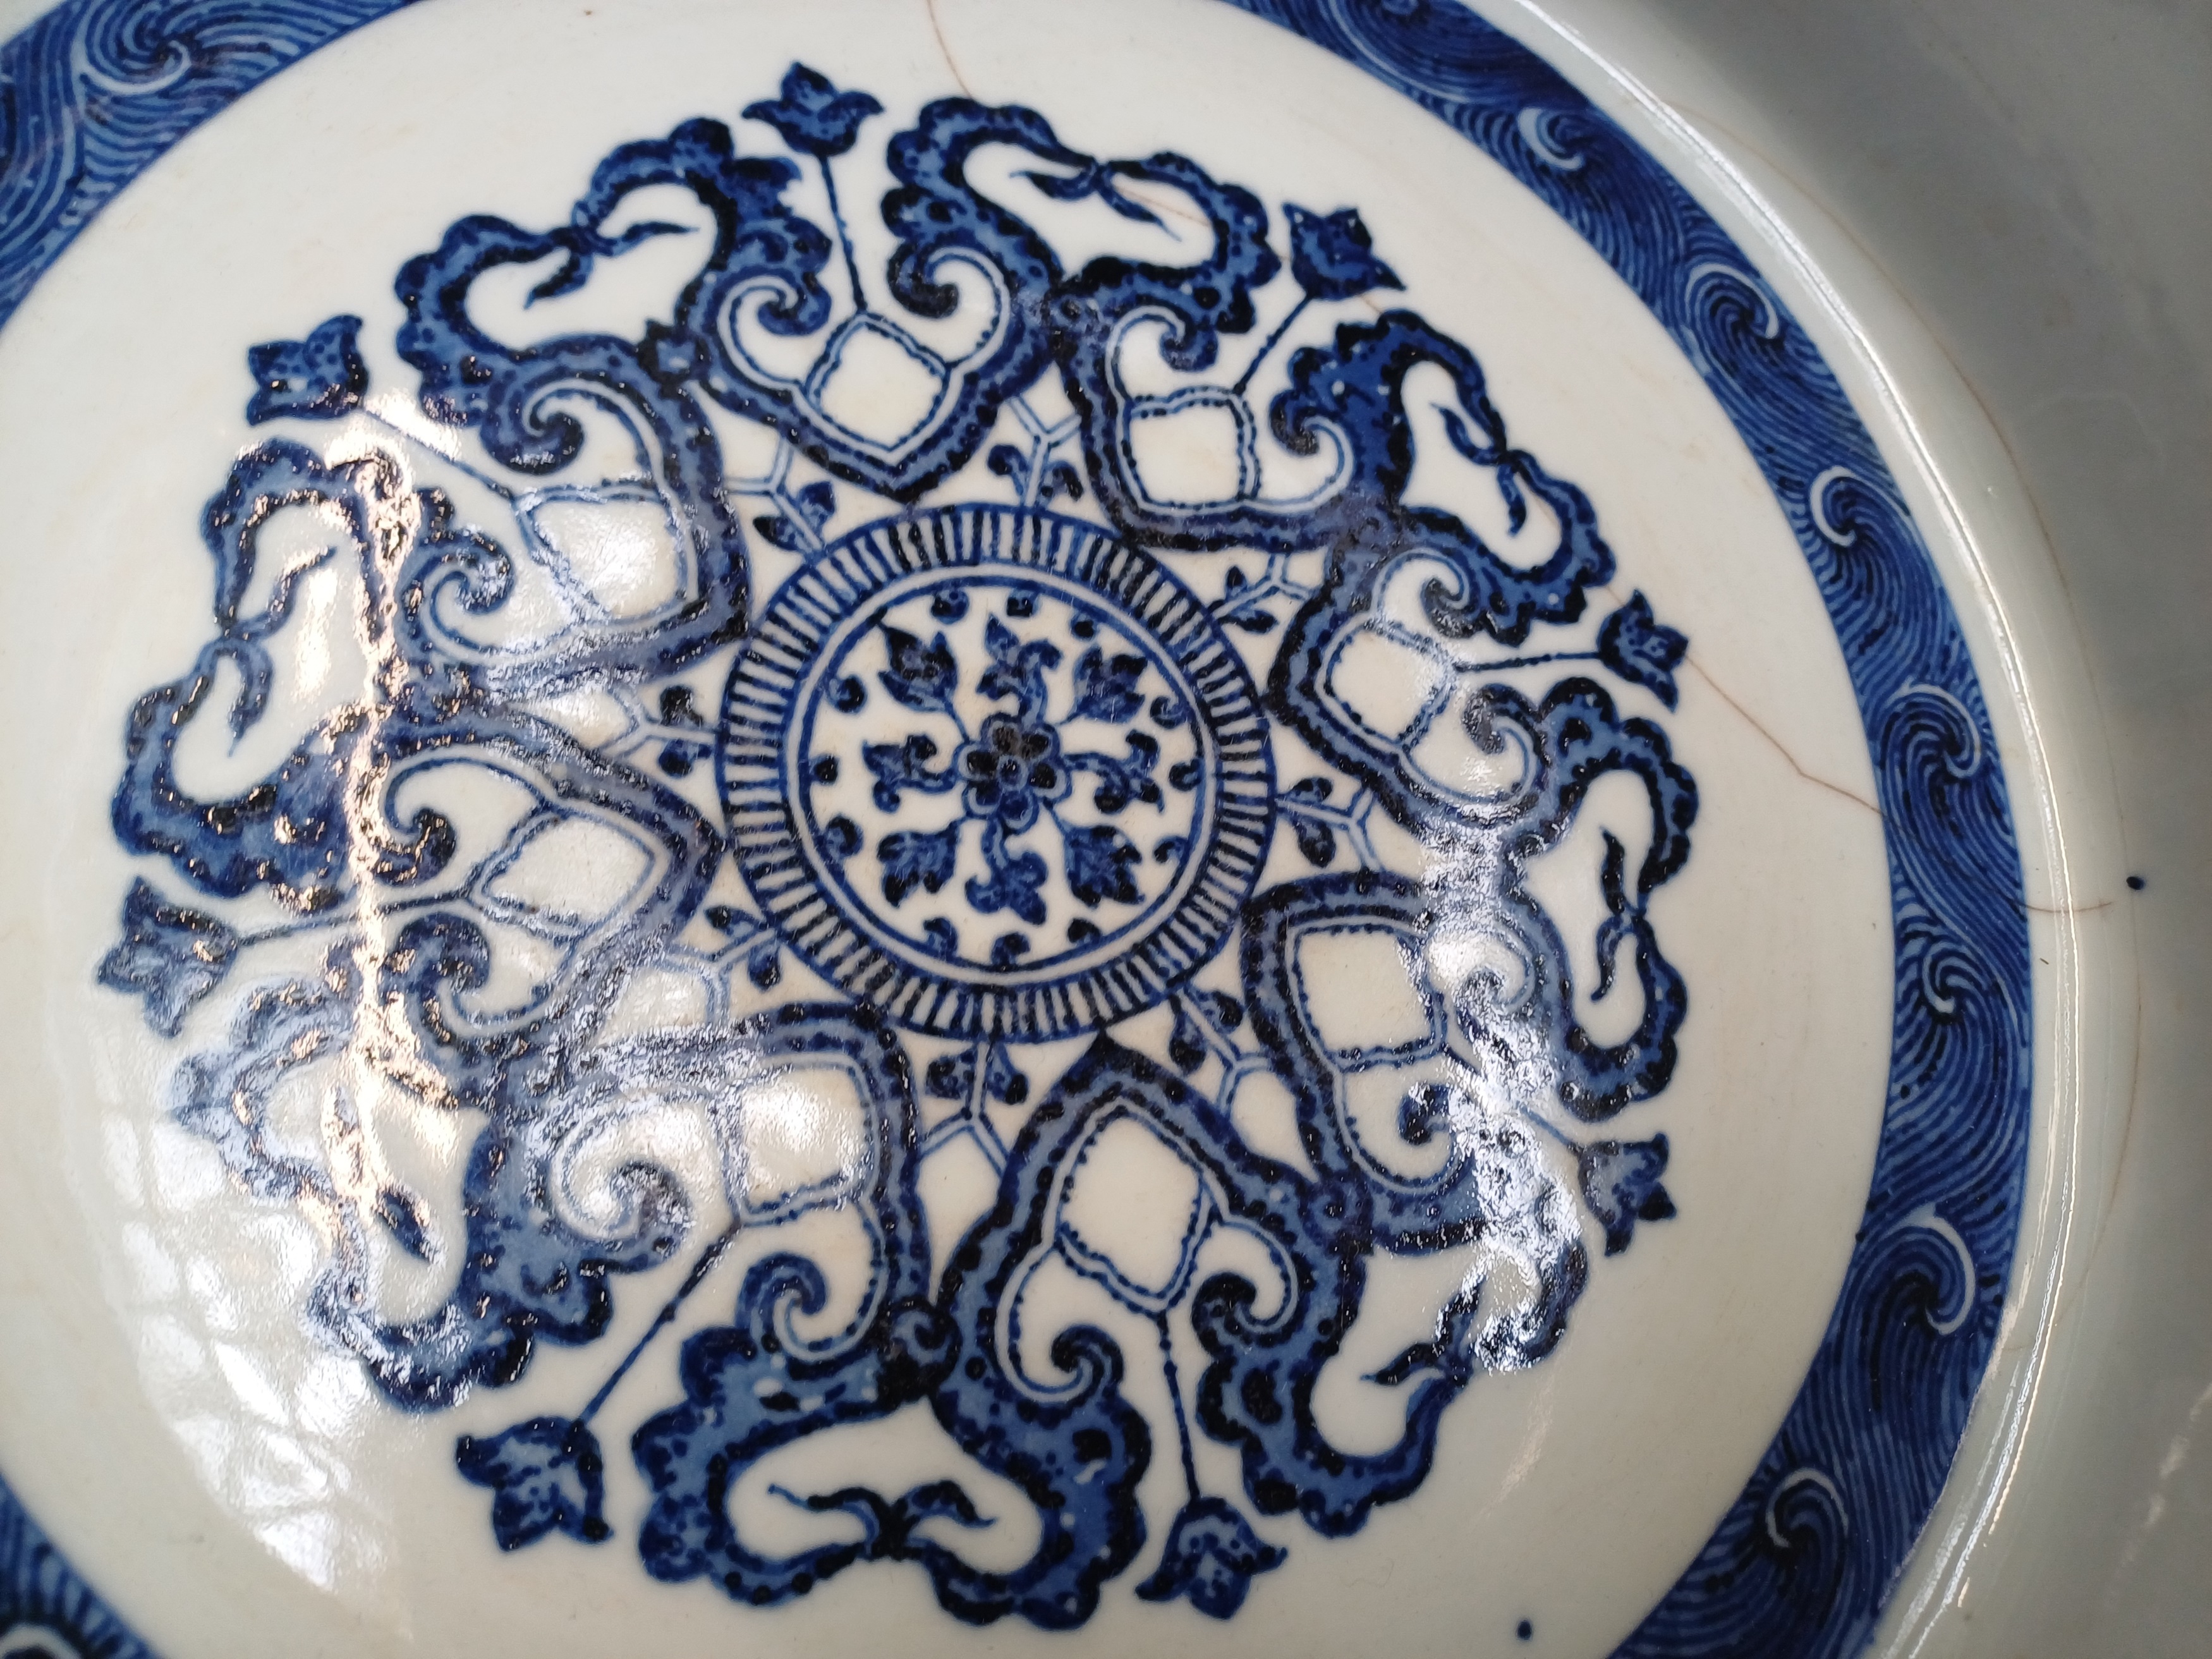 A CHINESE MING-STYLE BLUE AND WHITE 'LOTUS' BASIN 明式青花纏枝蓮紋盆 《大清雍正年製》款 - Image 5 of 14